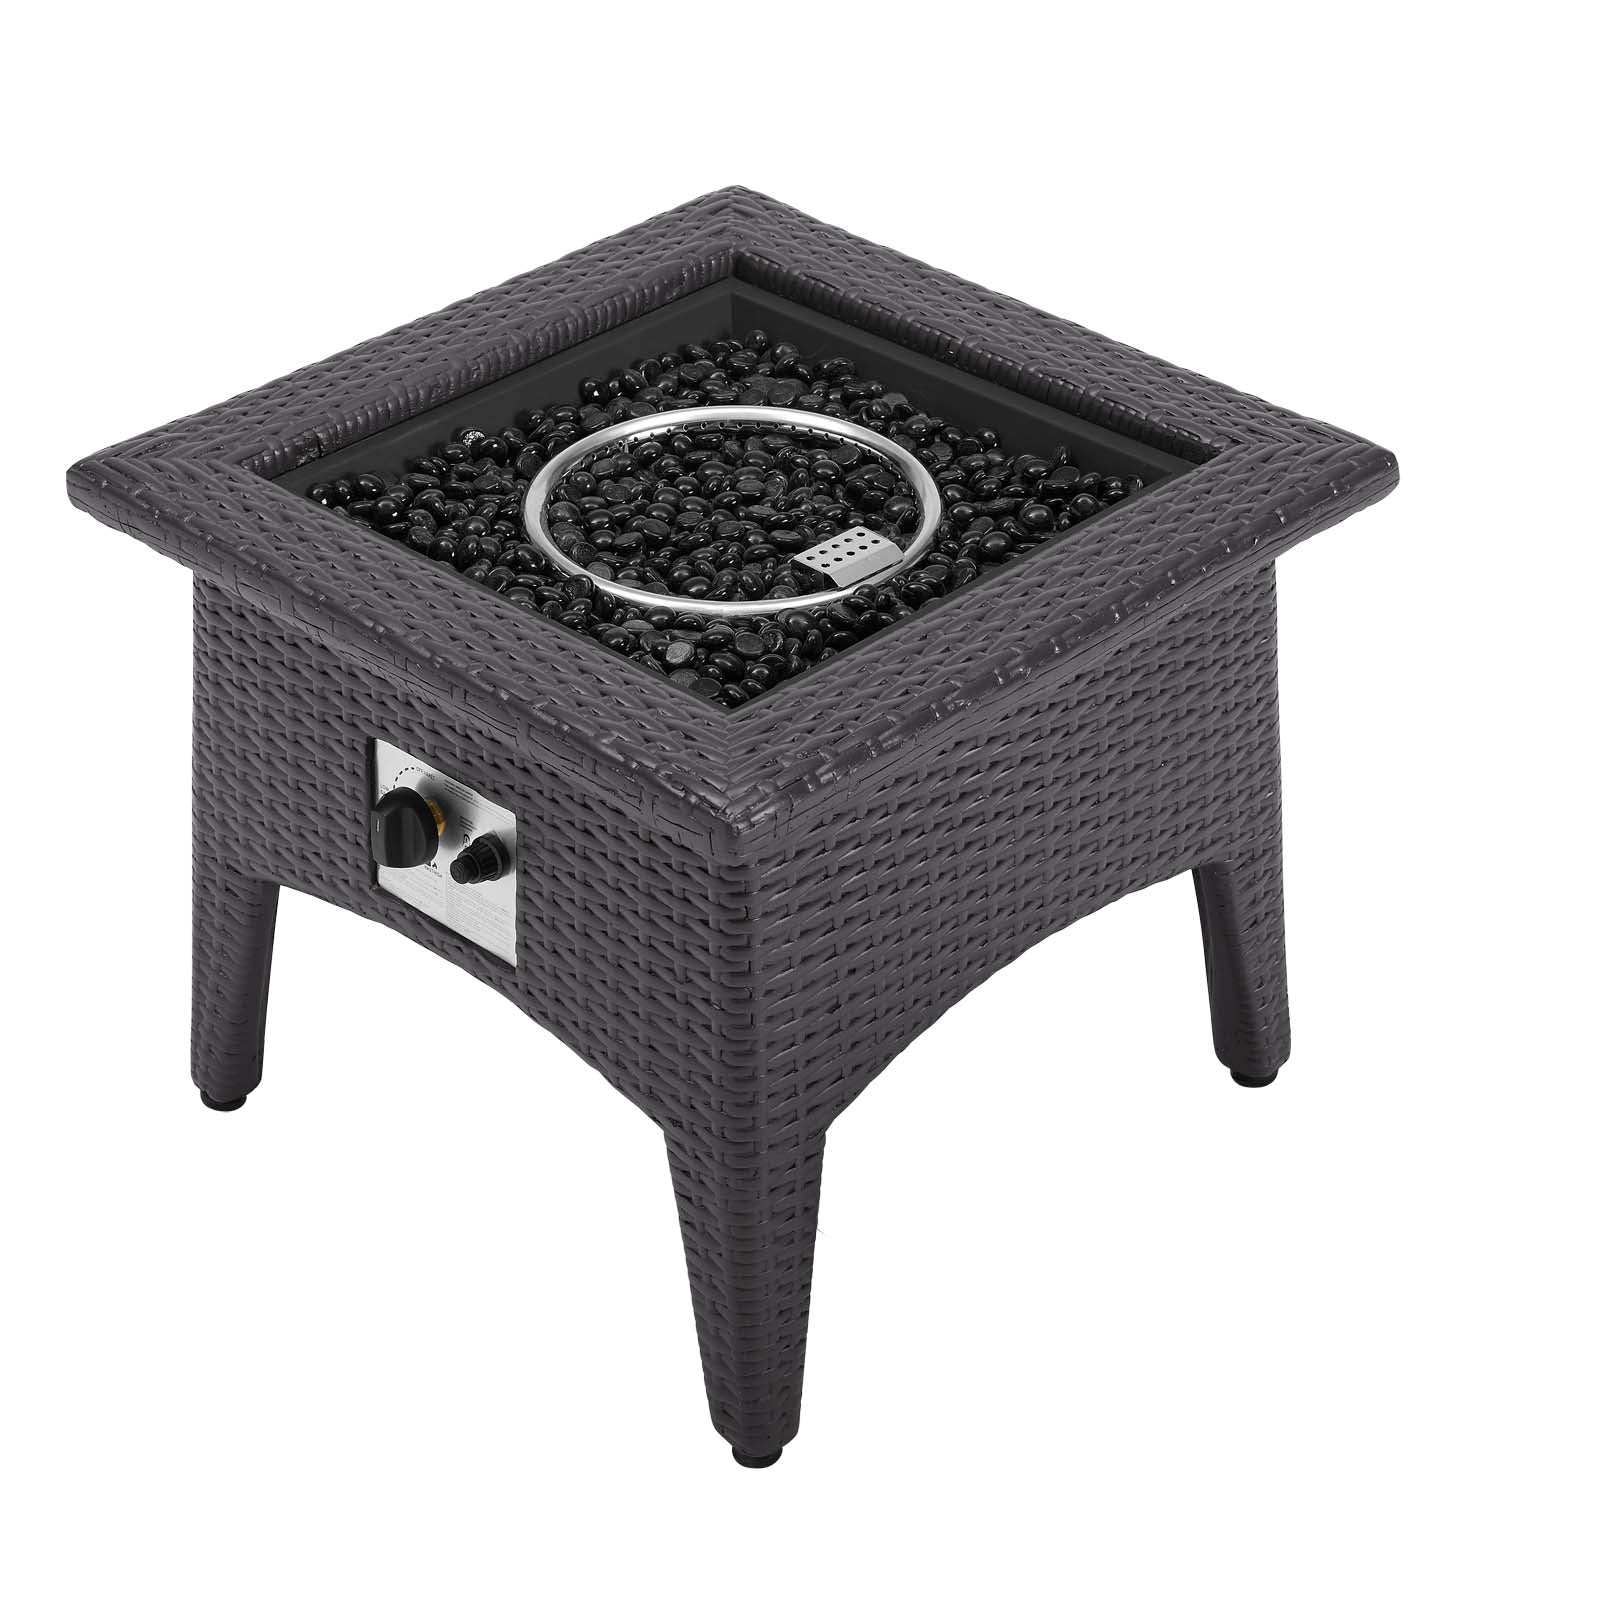 Modway Outdoor Conversation Sets - Convene 3 Piece Set Outdoor Patio with Fire Pit Espresso Turquois